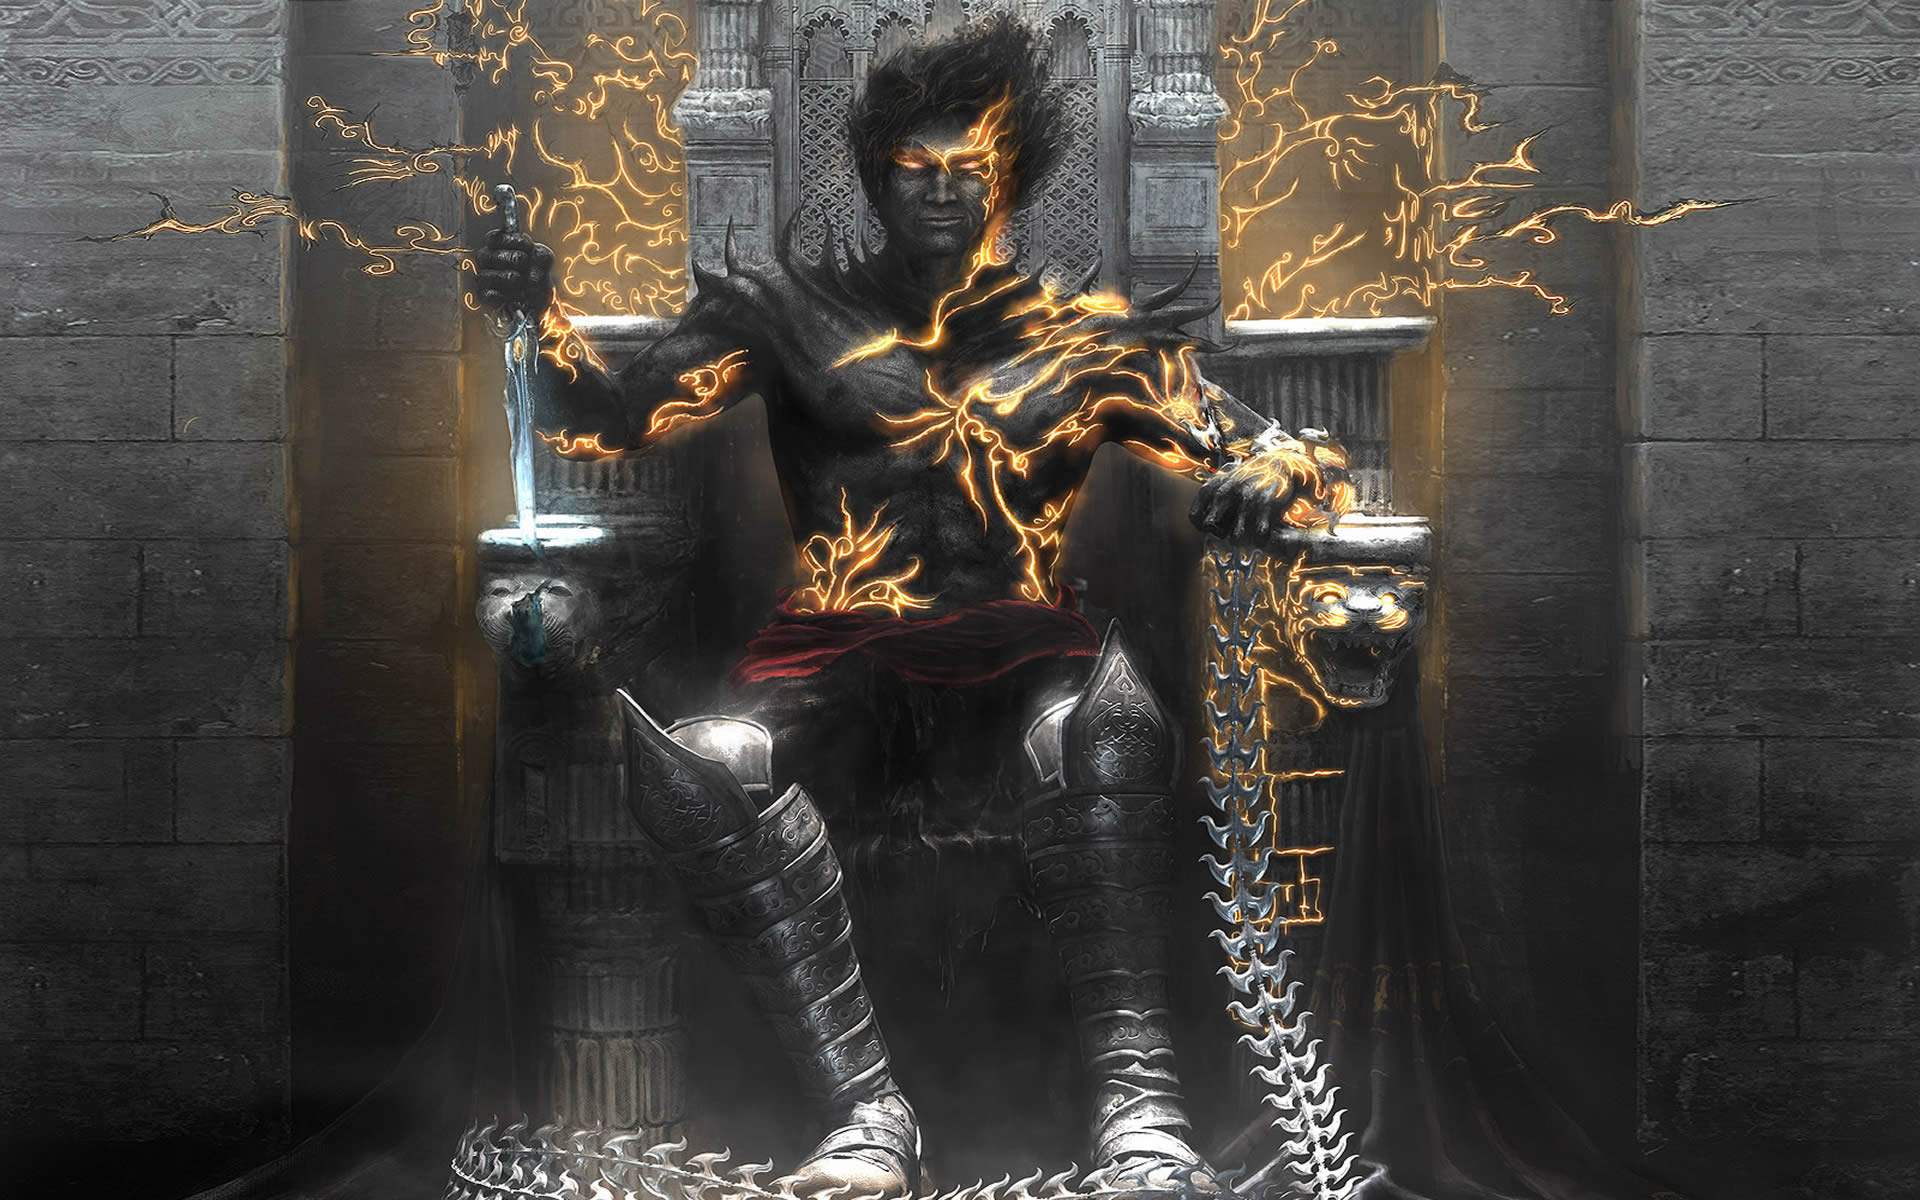 Prince On His Throne Action Games Wallpaper Image Featuring